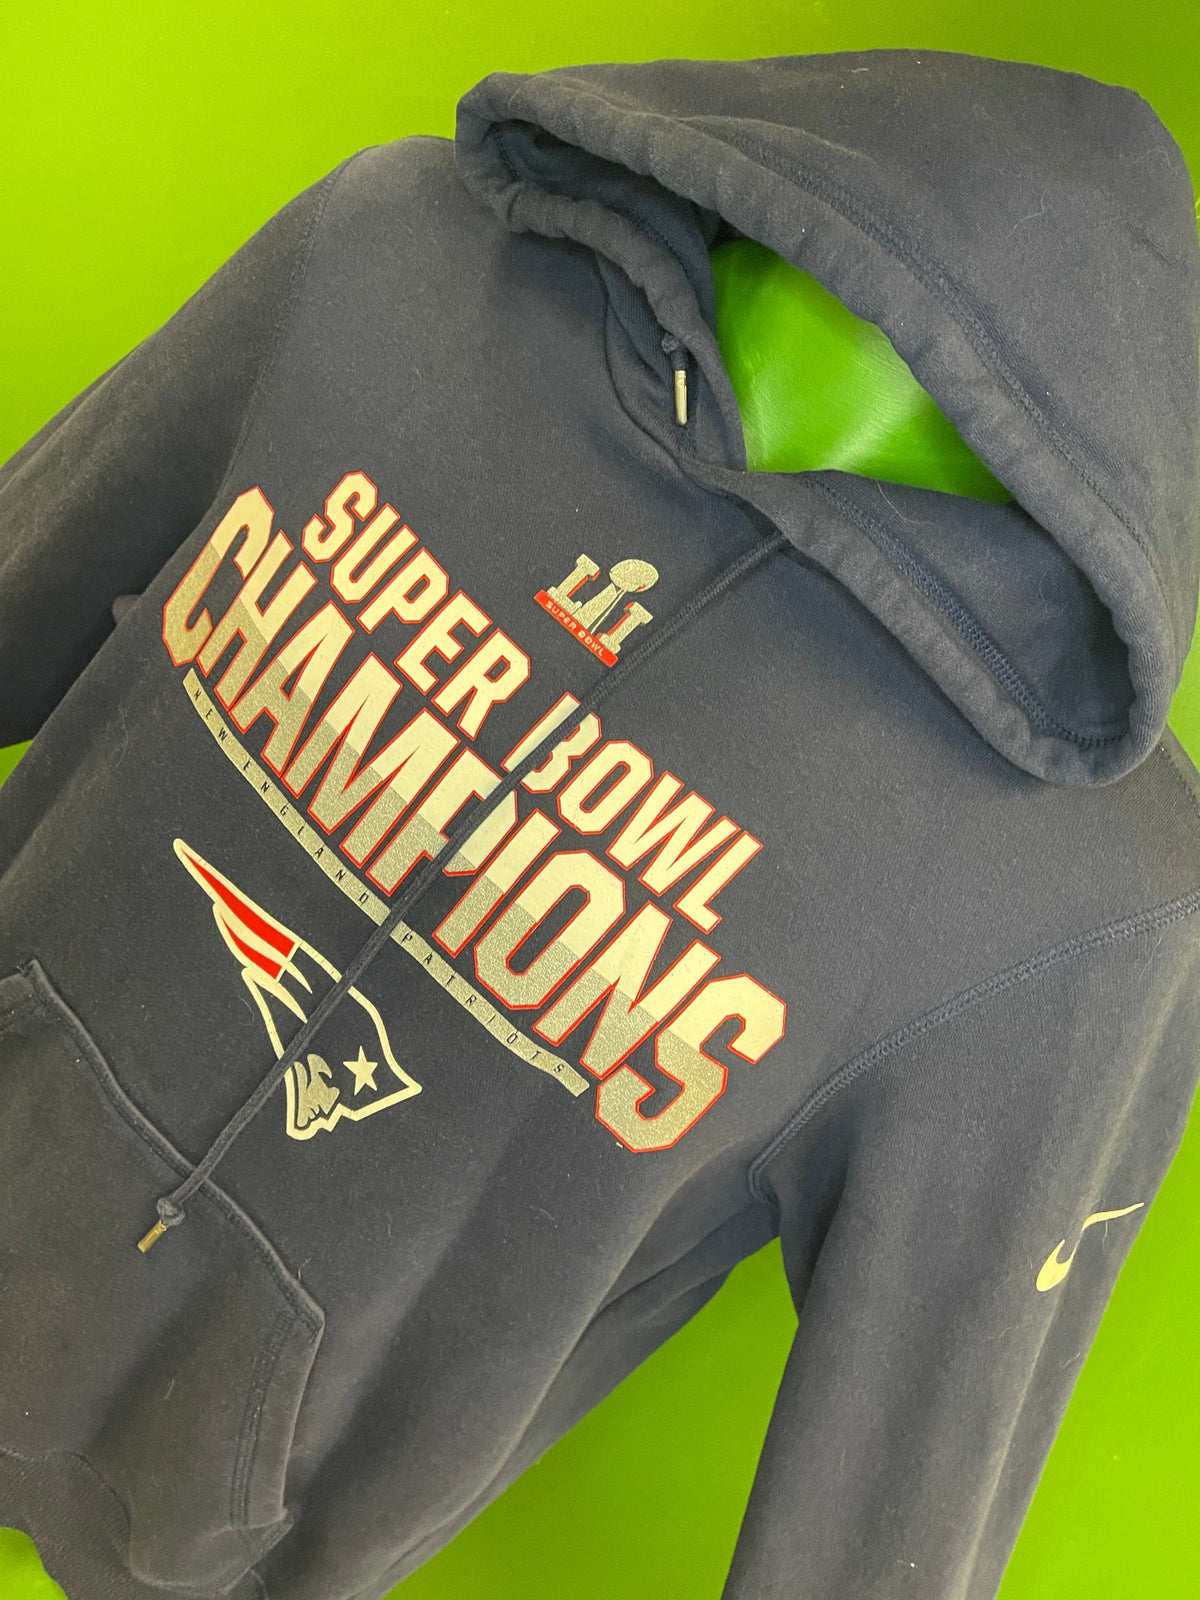 NFL New England Patriots Super Bowl LII Champions Pullover Hoodie Men's Small